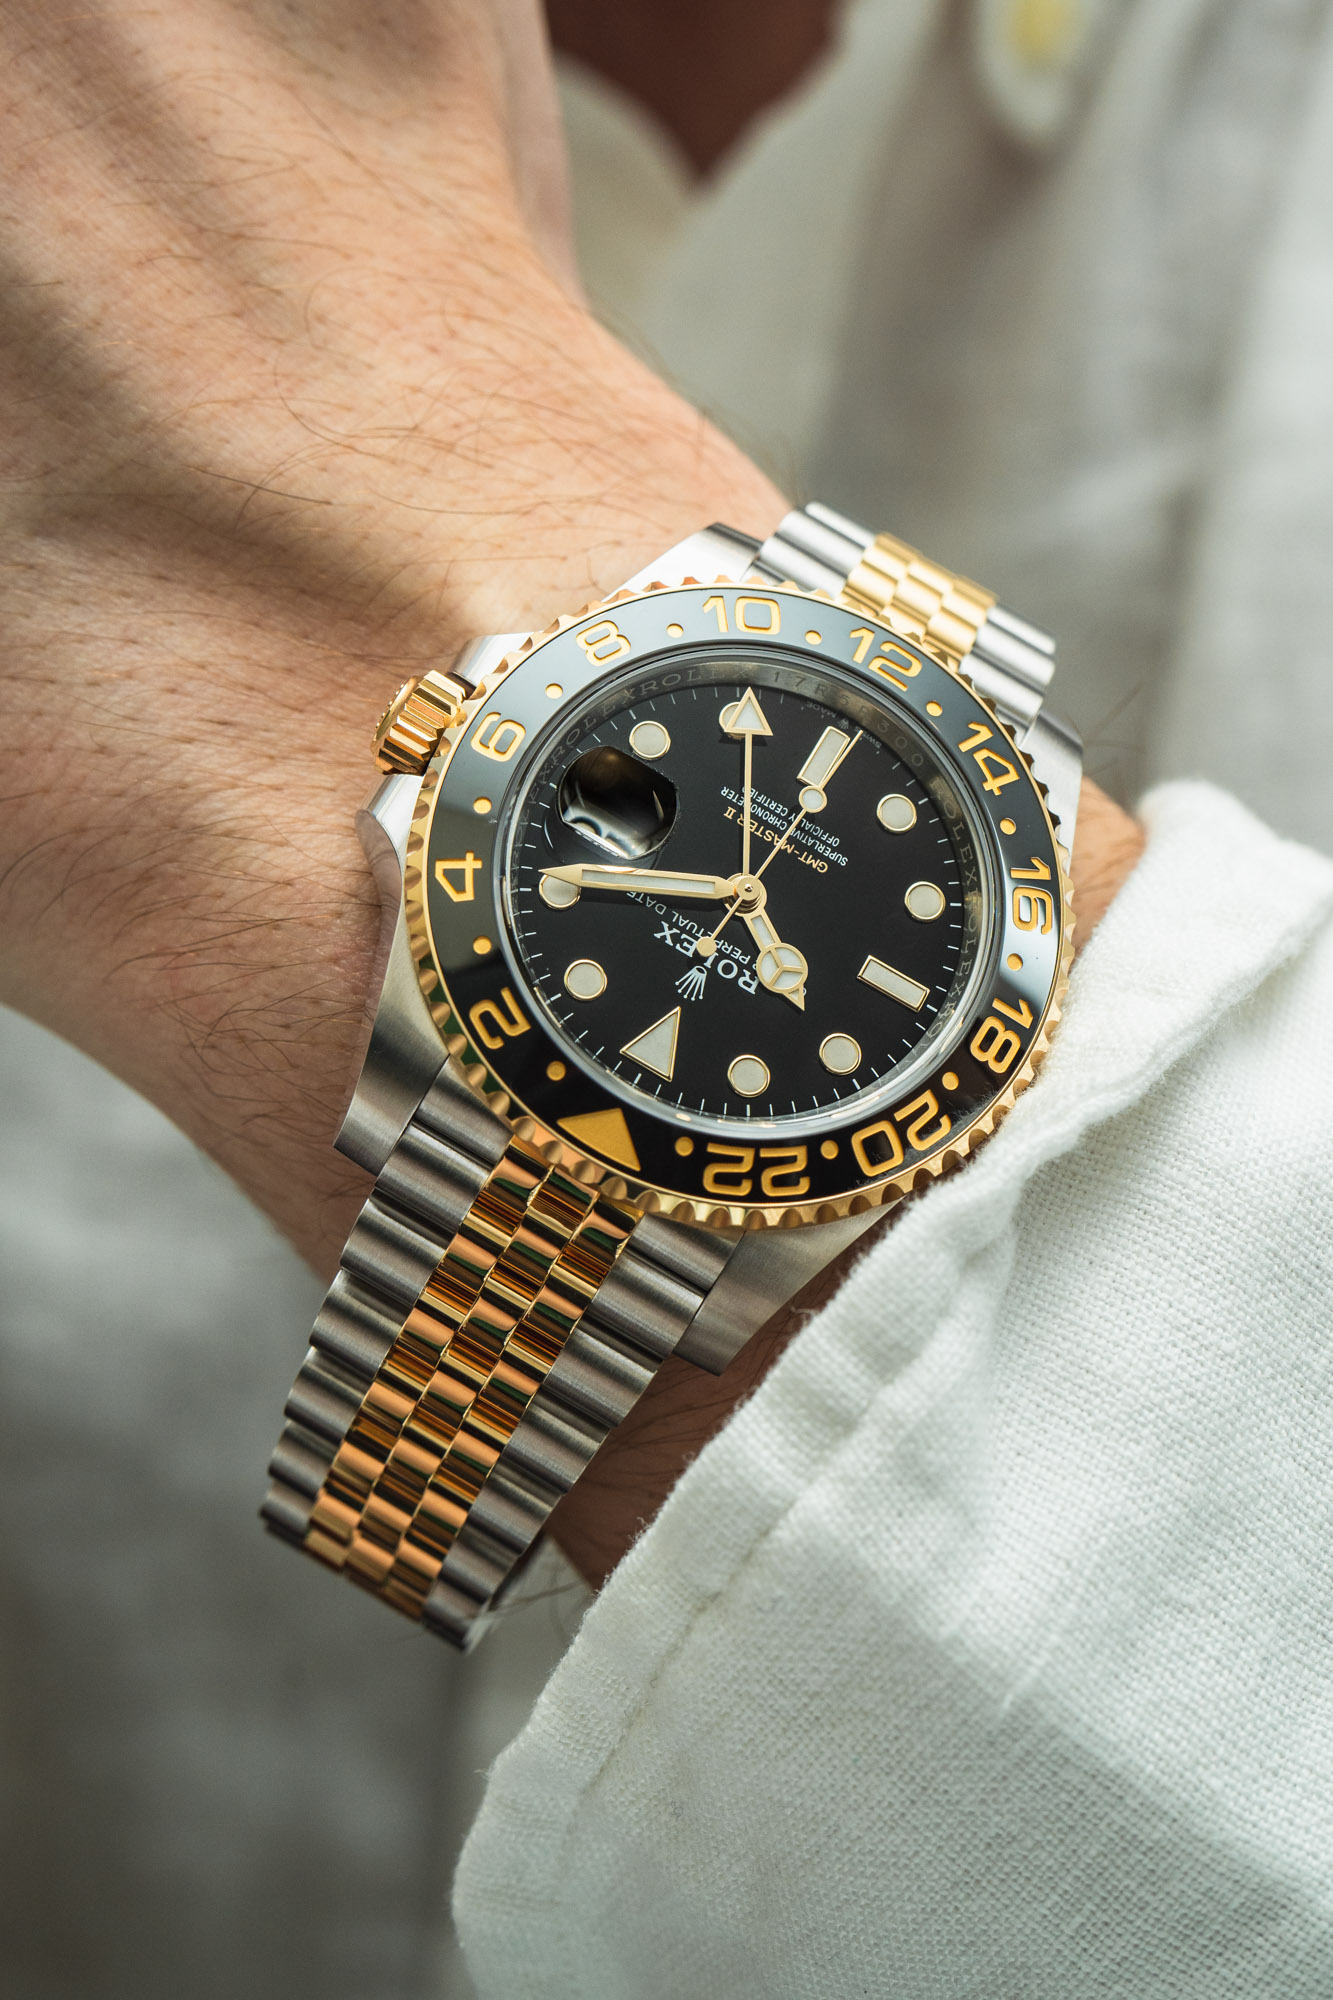 vrede Auto Akademi Rolex GMT-Master II Watch, An Era Of Two-Tone And Yellow Gold Returns |  aBlogtoWatch